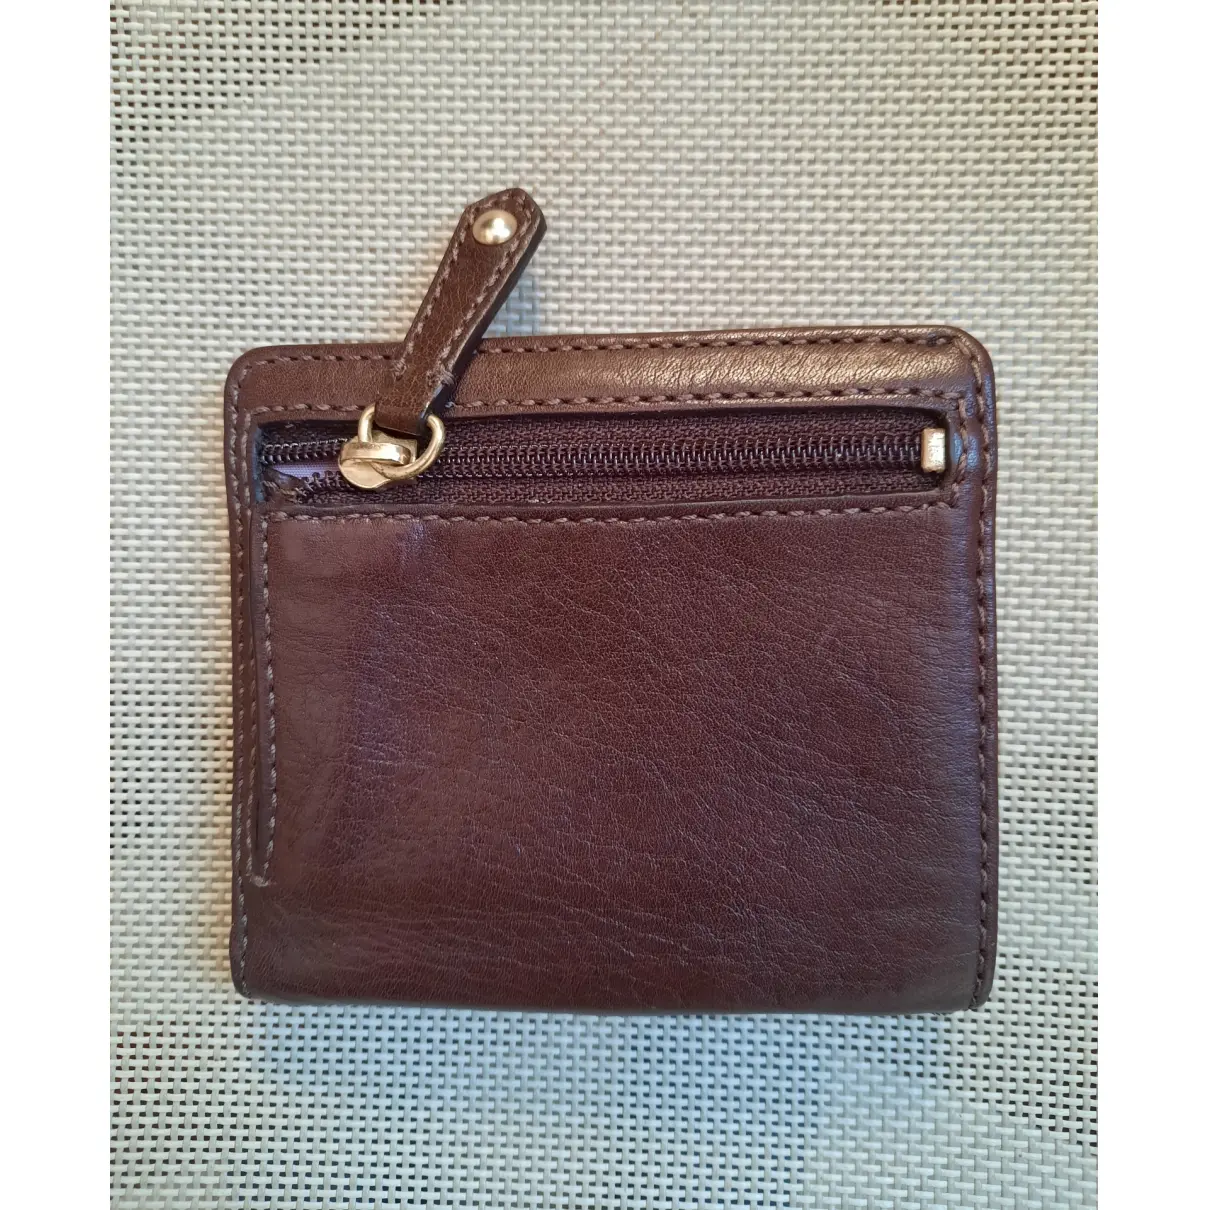 Buy Coach Leather wallet online